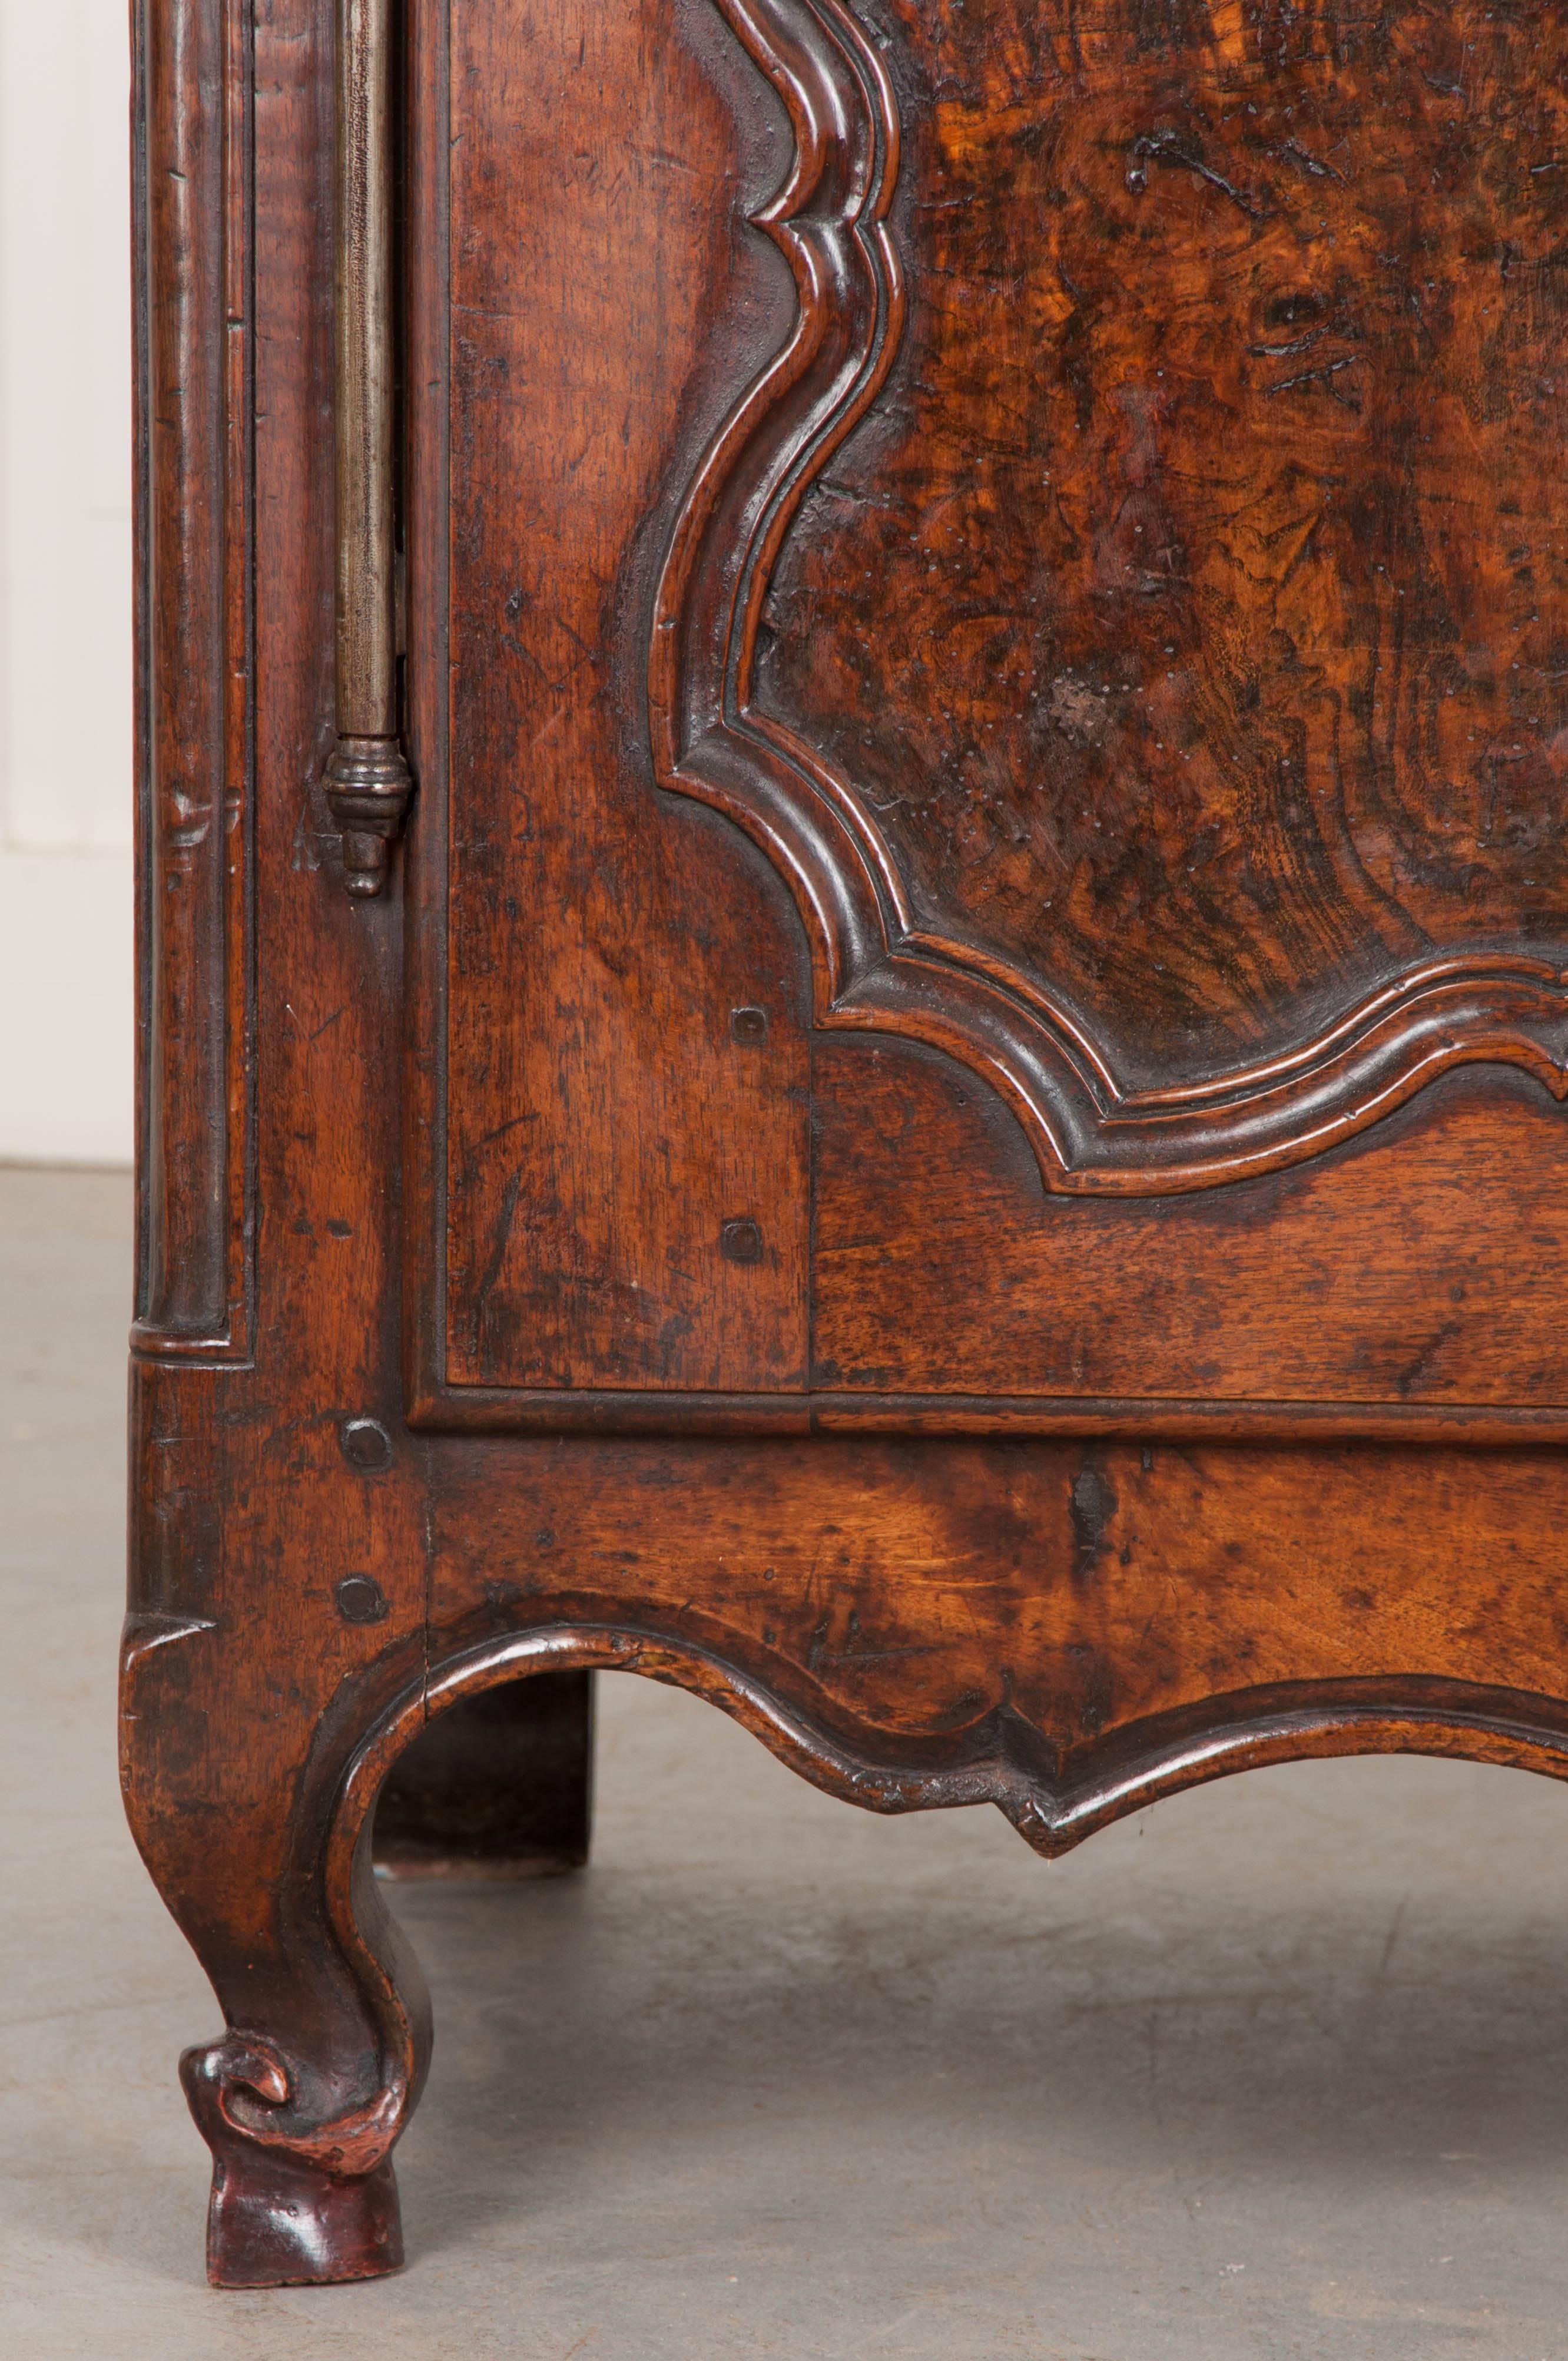 An amazing solid-walnut buffet, from 18th century France, with bountiful provincial charm and exceptional carved details. The top of the buffet is made of oak, which was also used modestly in the apron. It is rich in color, with beautiful grains.